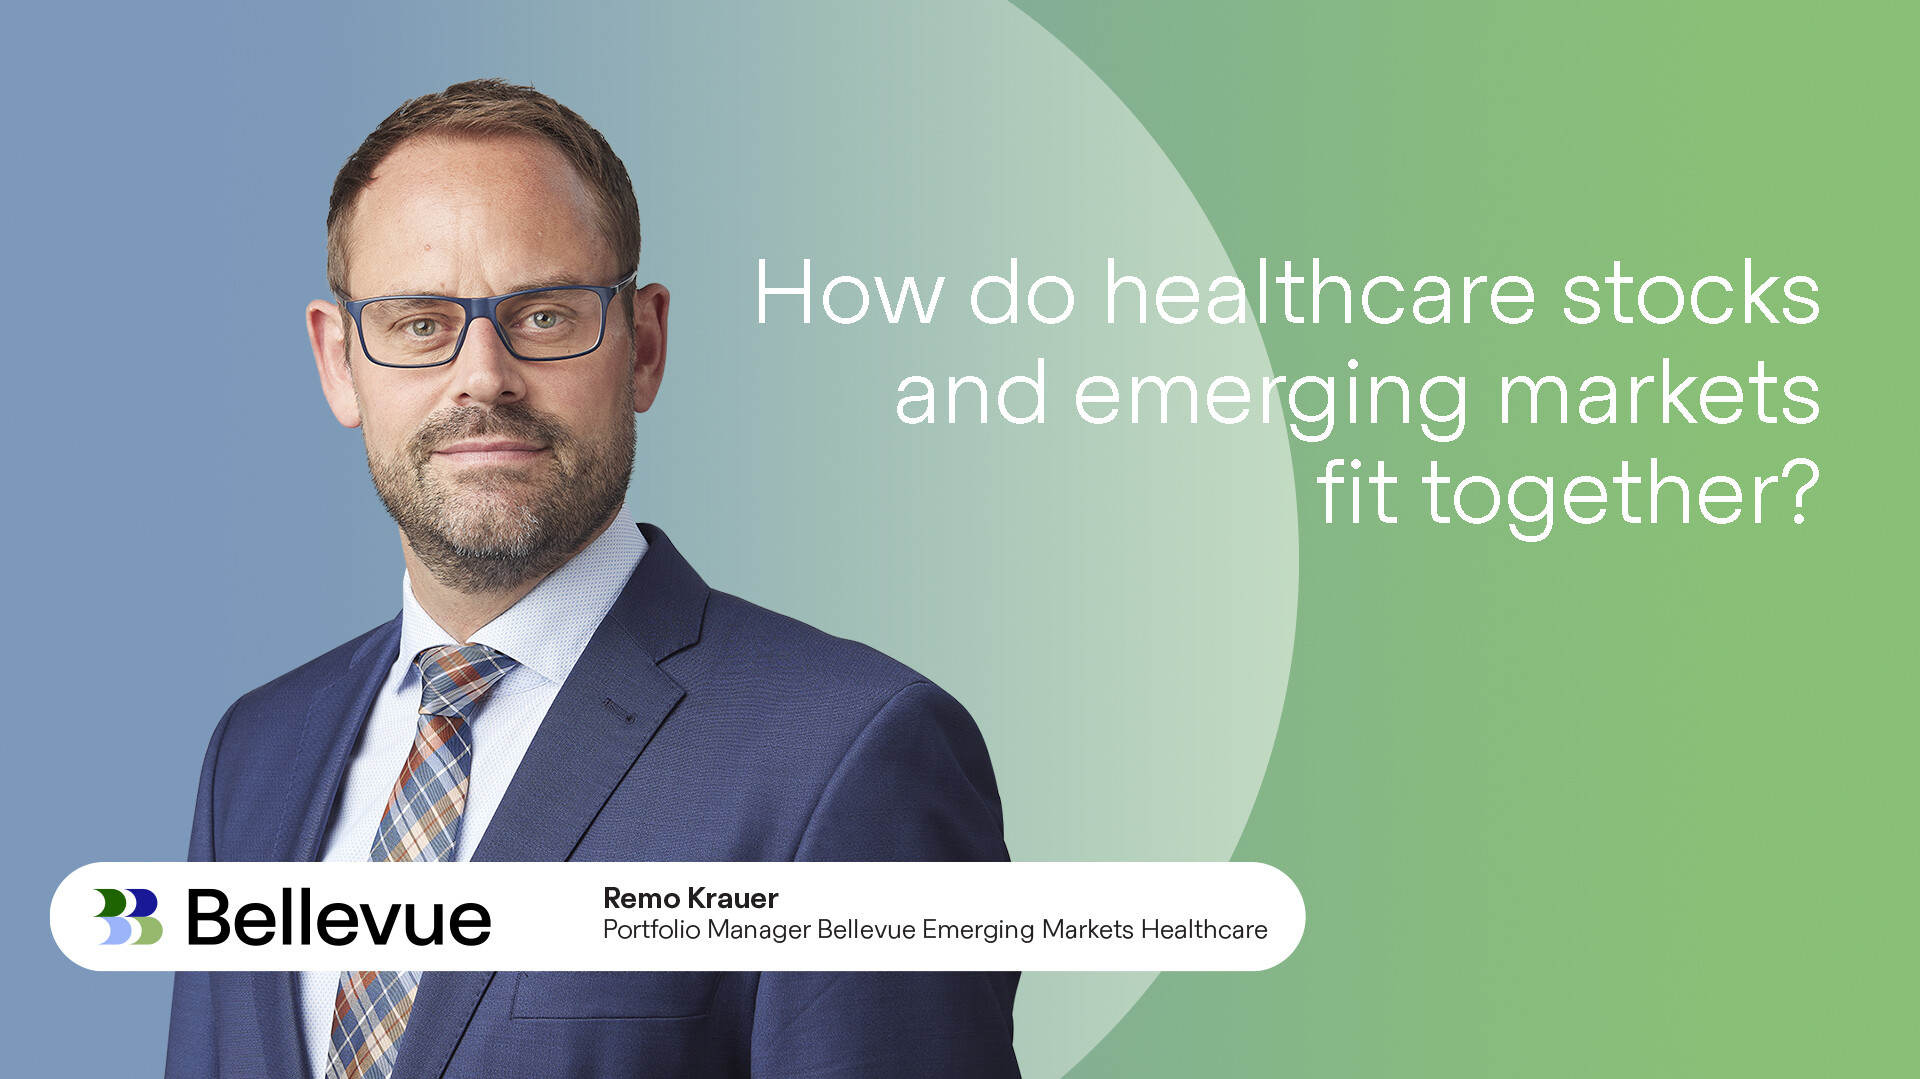 Bellevue Emerging Markets Healthcare explained in 90 seconds